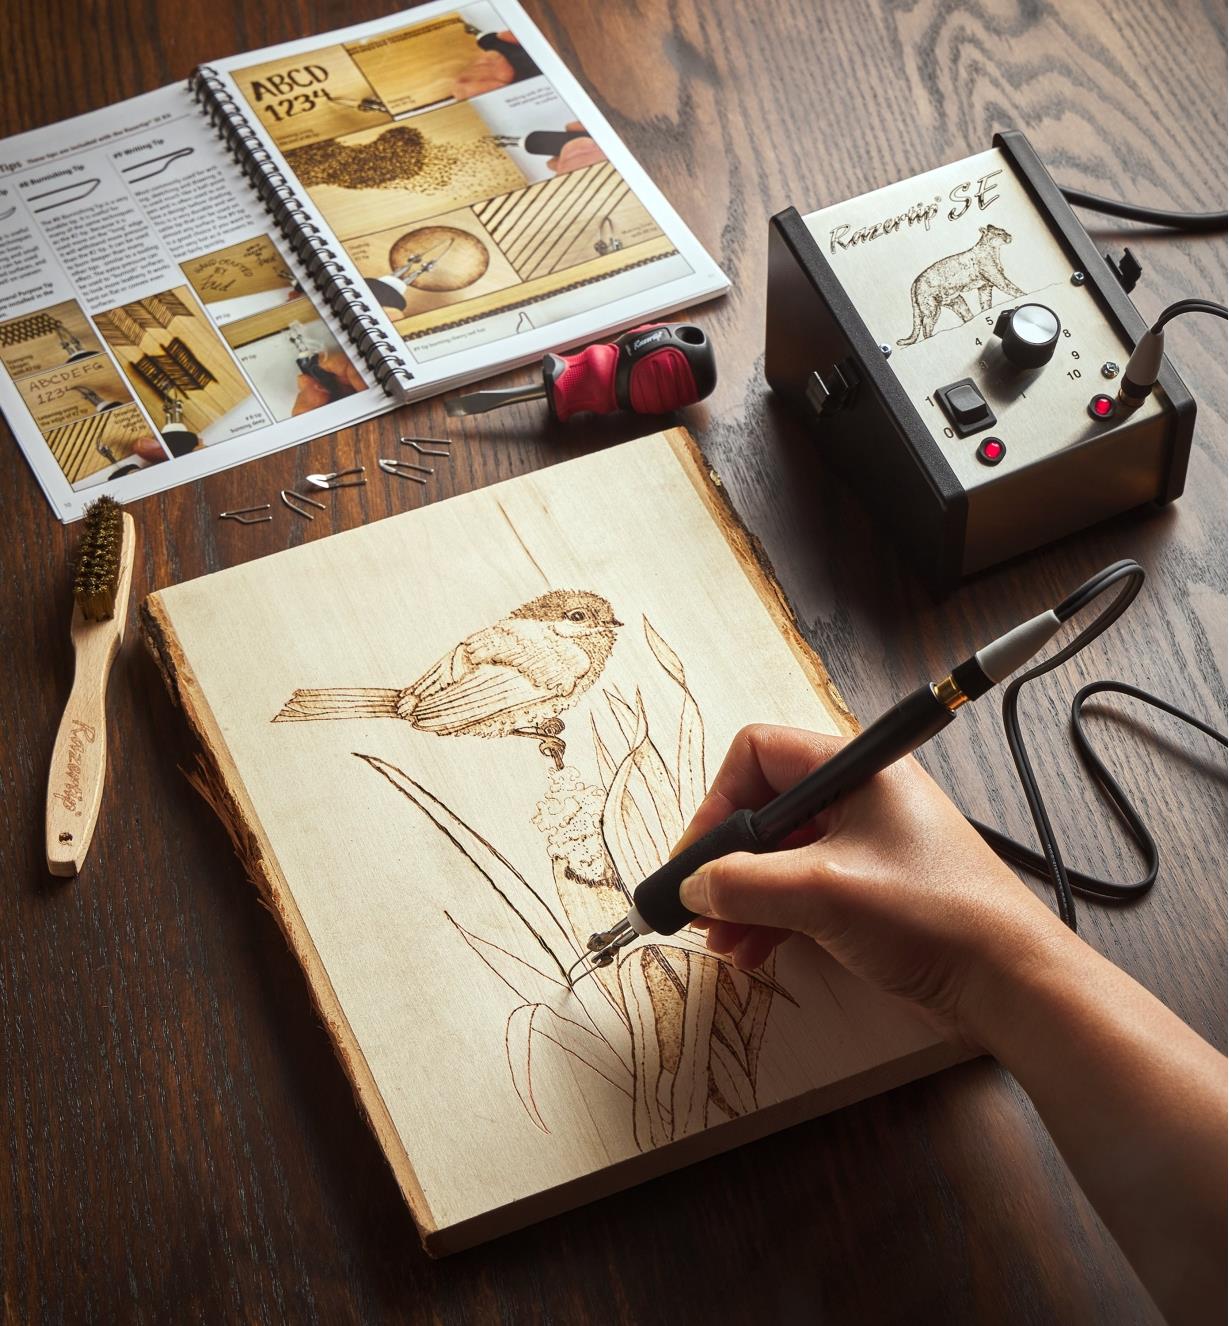 A picture of a bird being burned into a plaque with a Razertip pyrography kit